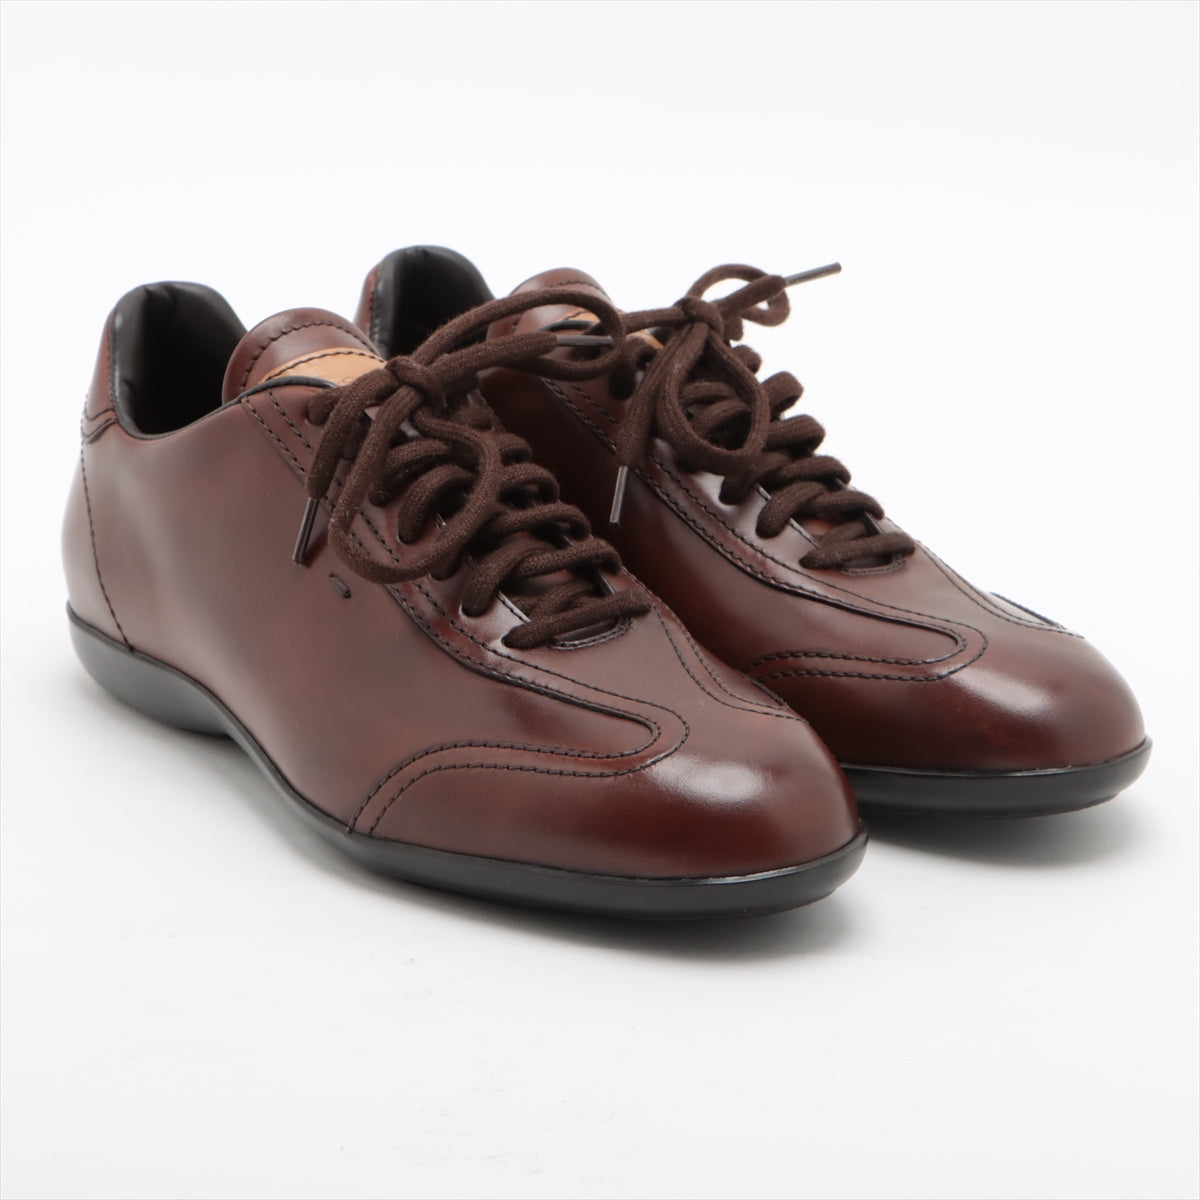 Santoni Leather Leather shoes 5 Men's Brown Replacement Laces Included There is a crack in the sole on the left foot